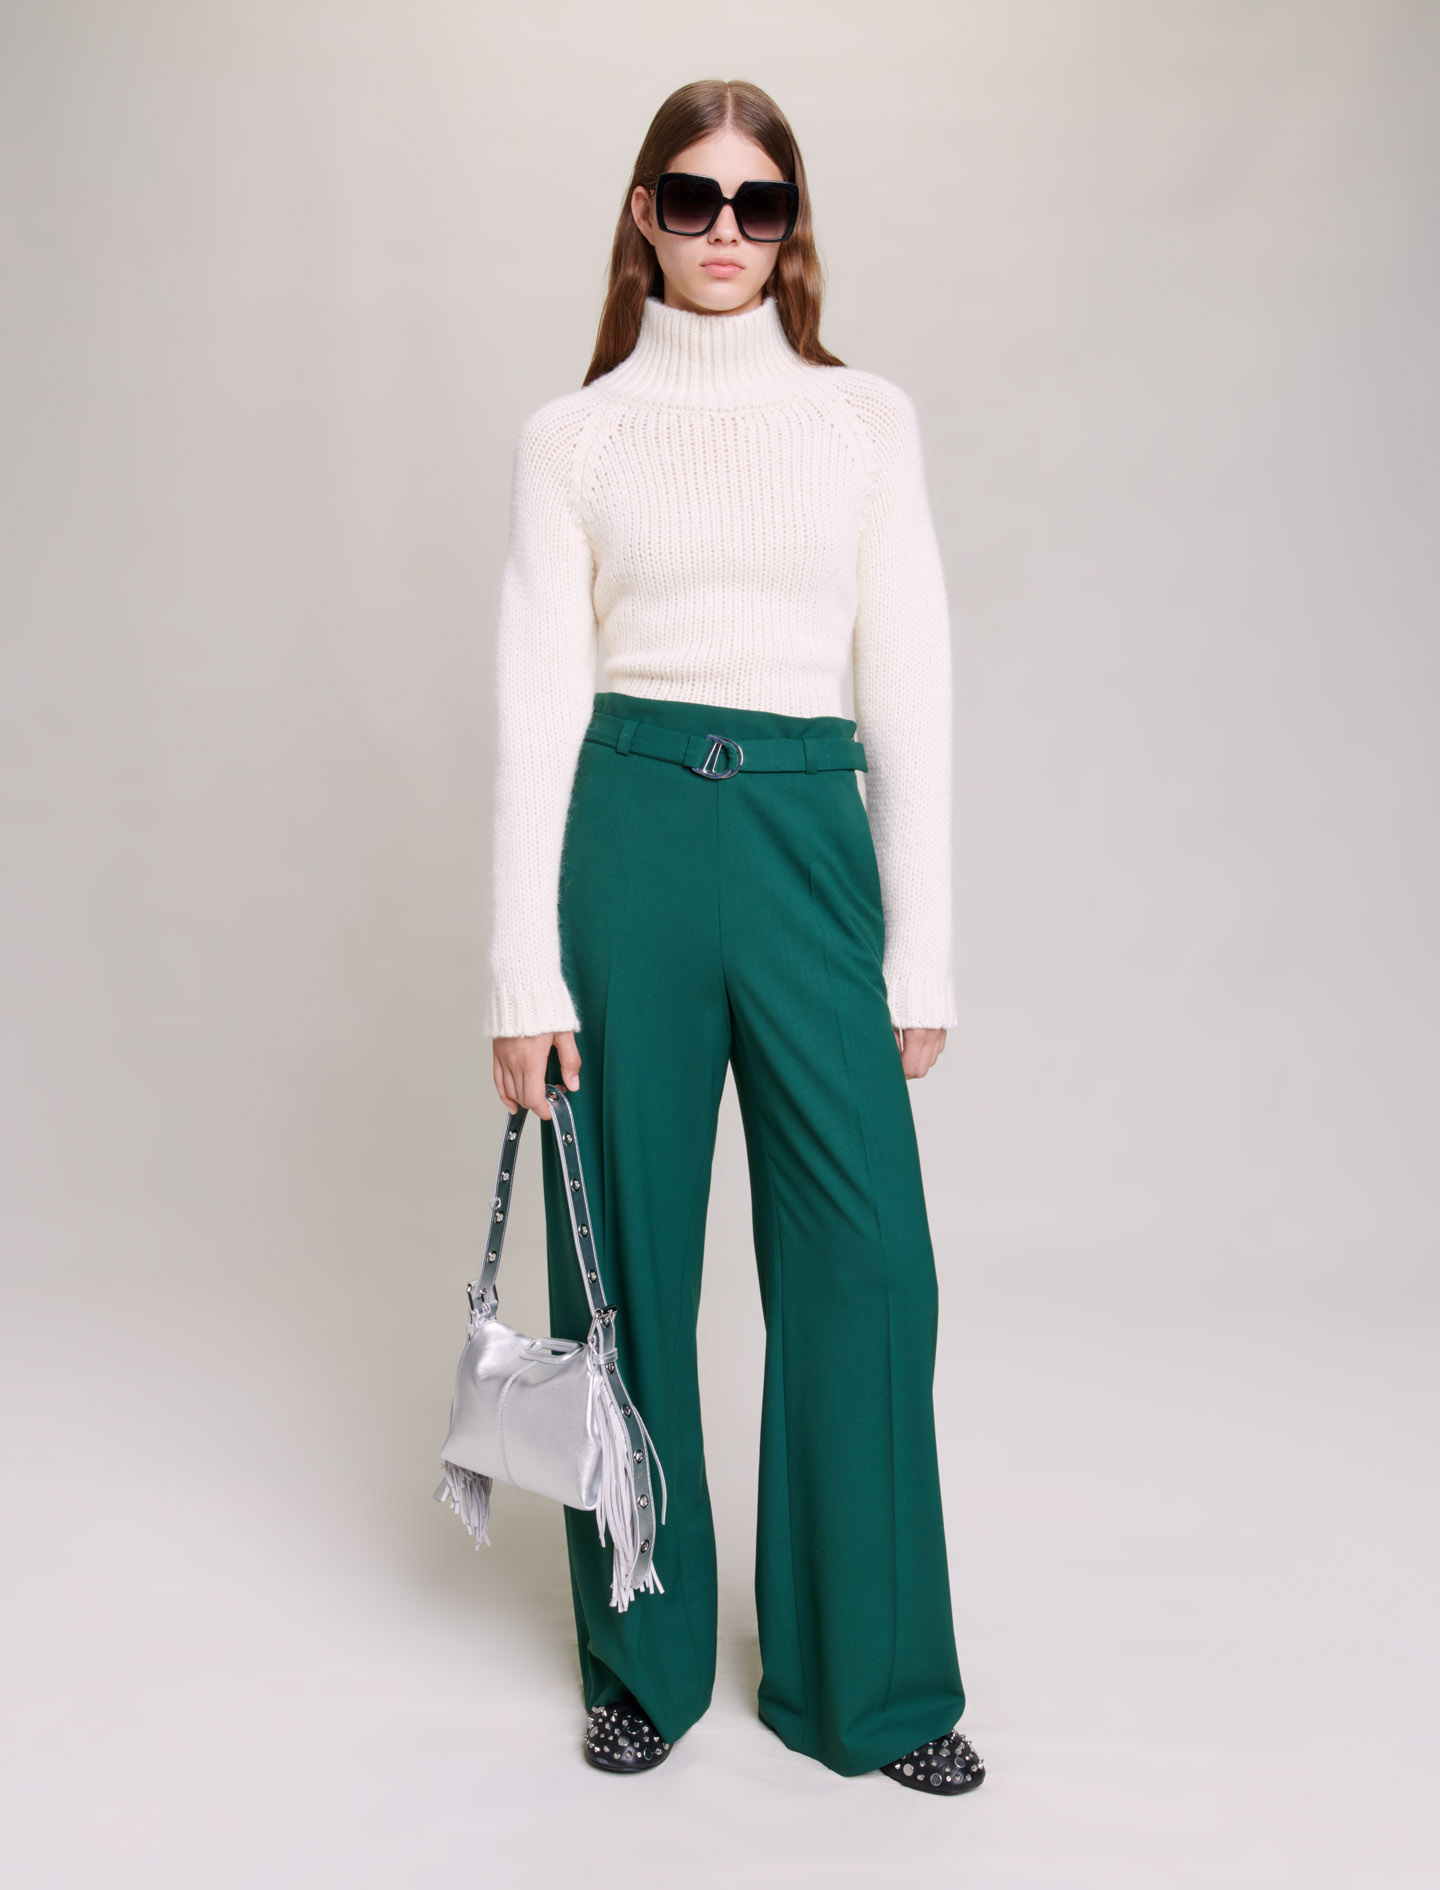 Maje Woman's polyester, Wide-leg suit trousers for Fall/Winter, in color Bottle Green /